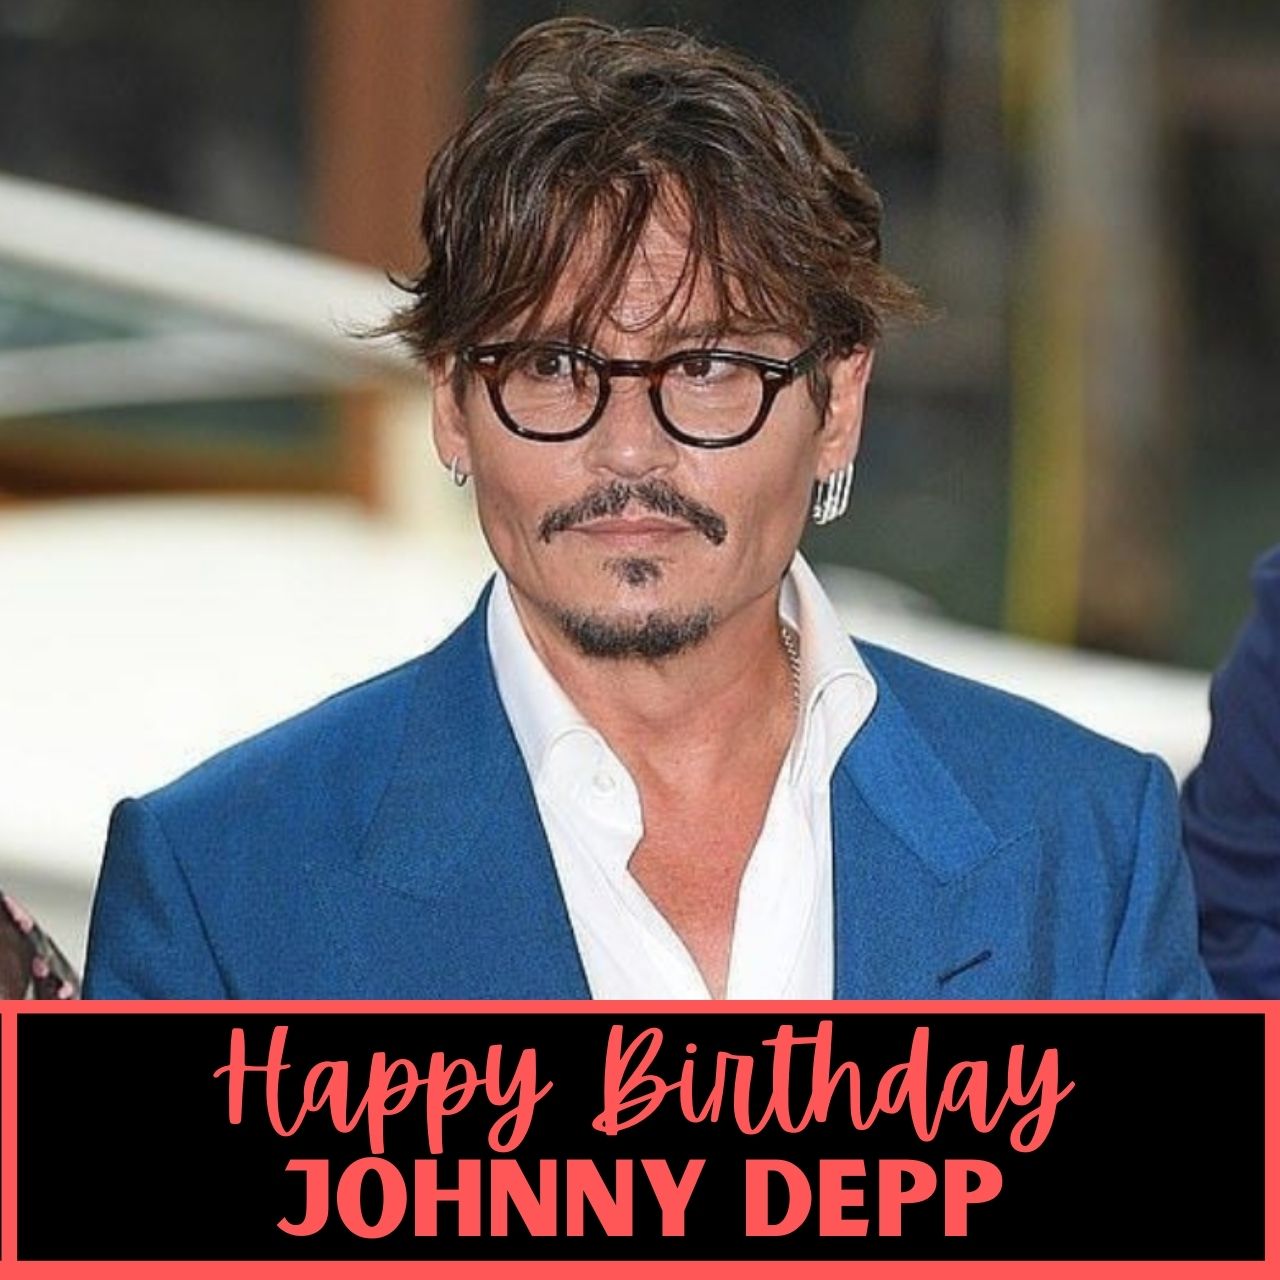 Happy Birthday Johnny Depp wishes, Images (pic), Greetings and WhatsApp Status Video Download